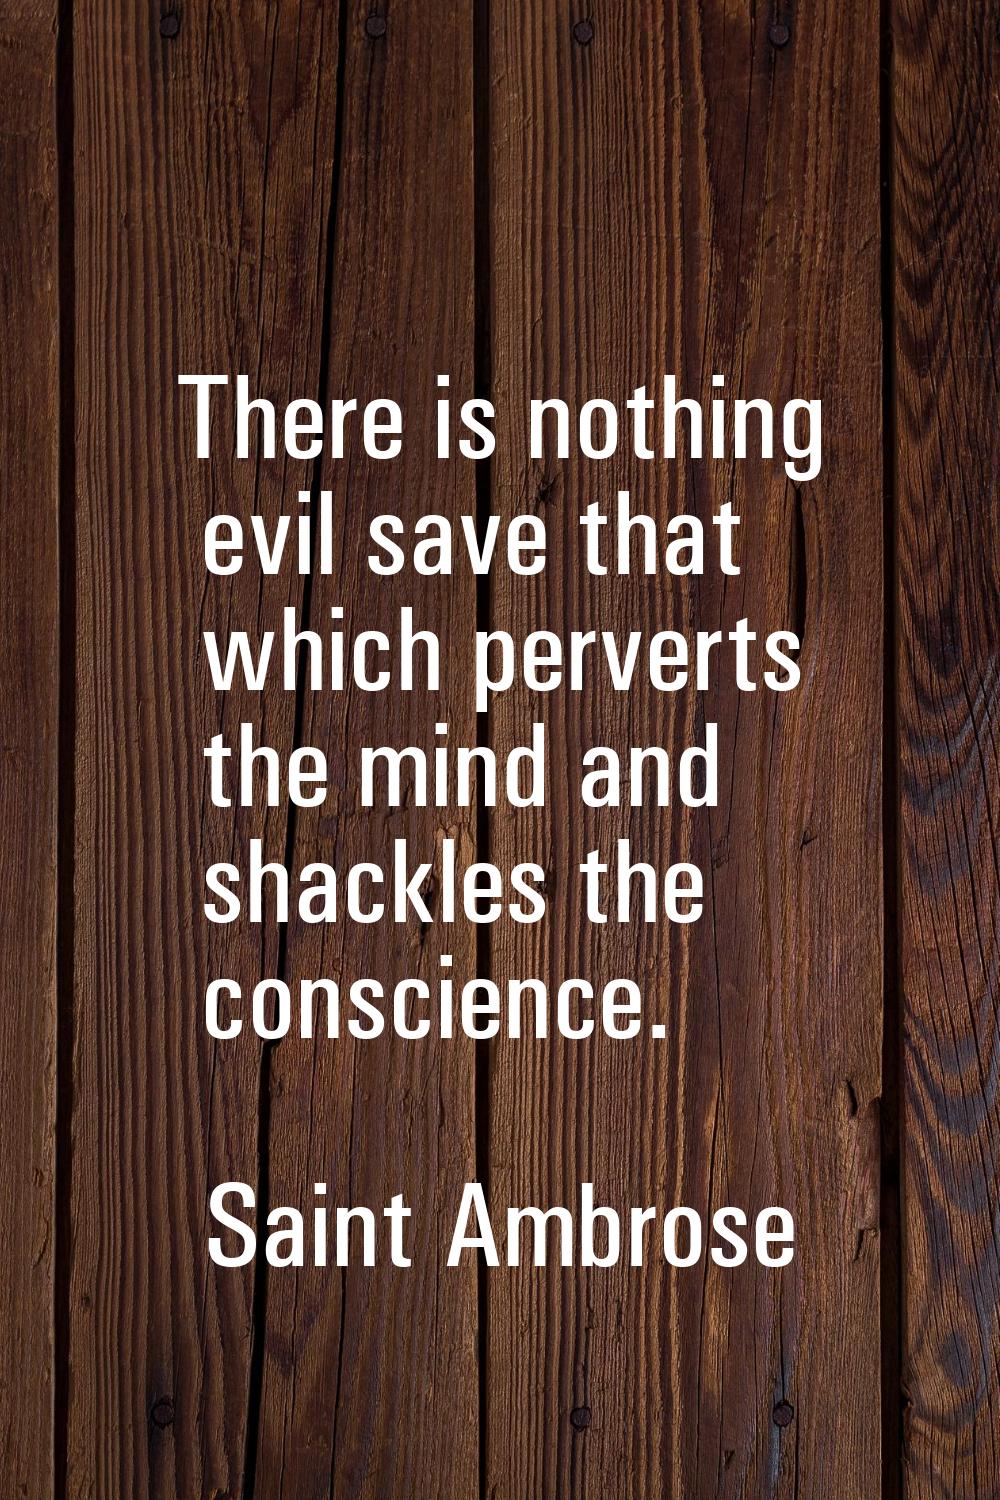 There is nothing evil save that which perverts the mind and shackles the conscience.